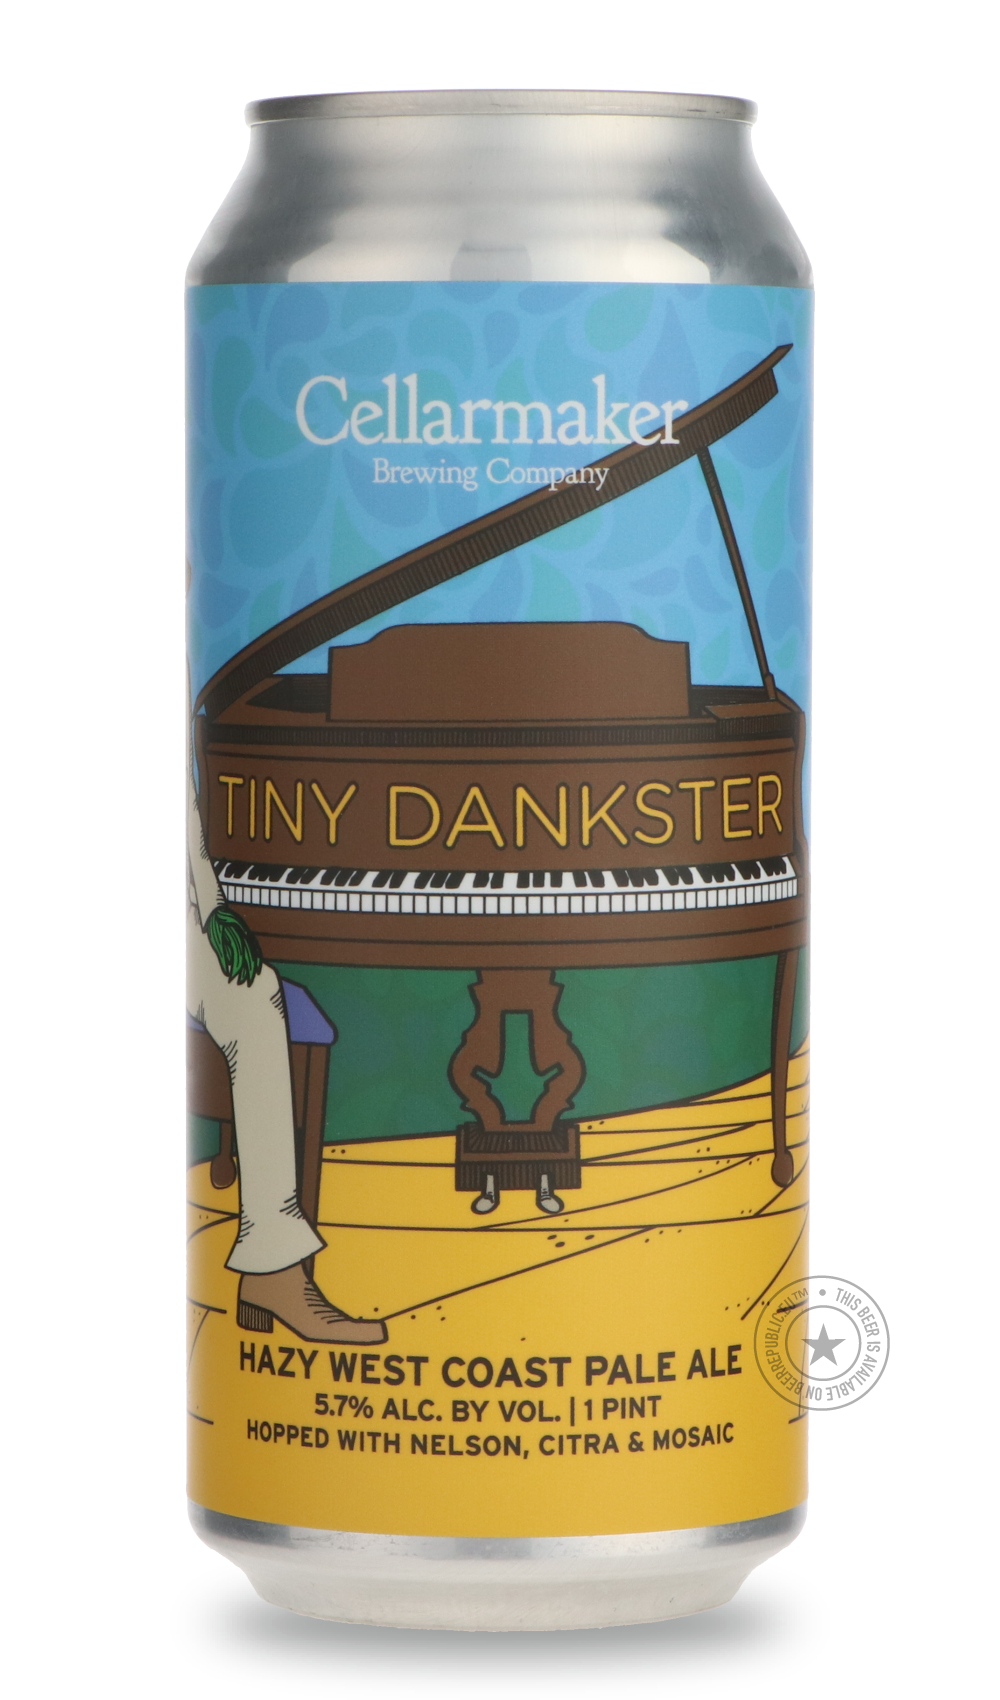 -Cellarmaker- Tiny Dankster-Pale- Only @ Beer Republic - The best online beer store for American & Canadian craft beer - Buy beer online from the USA and Canada - Bier online kopen - Amerikaans bier kopen - Craft beer store - Craft beer kopen - Amerikanisch bier kaufen - Bier online kaufen - Acheter biere online - IPA - Stout - Porter - New England IPA - Hazy IPA - Imperial Stout - Barrel Aged - Barrel Aged Imperial Stout - Brown - Dark beer - Blond - Blonde - Pilsner - Lager - Wheat - Weizen - Amber - Barl